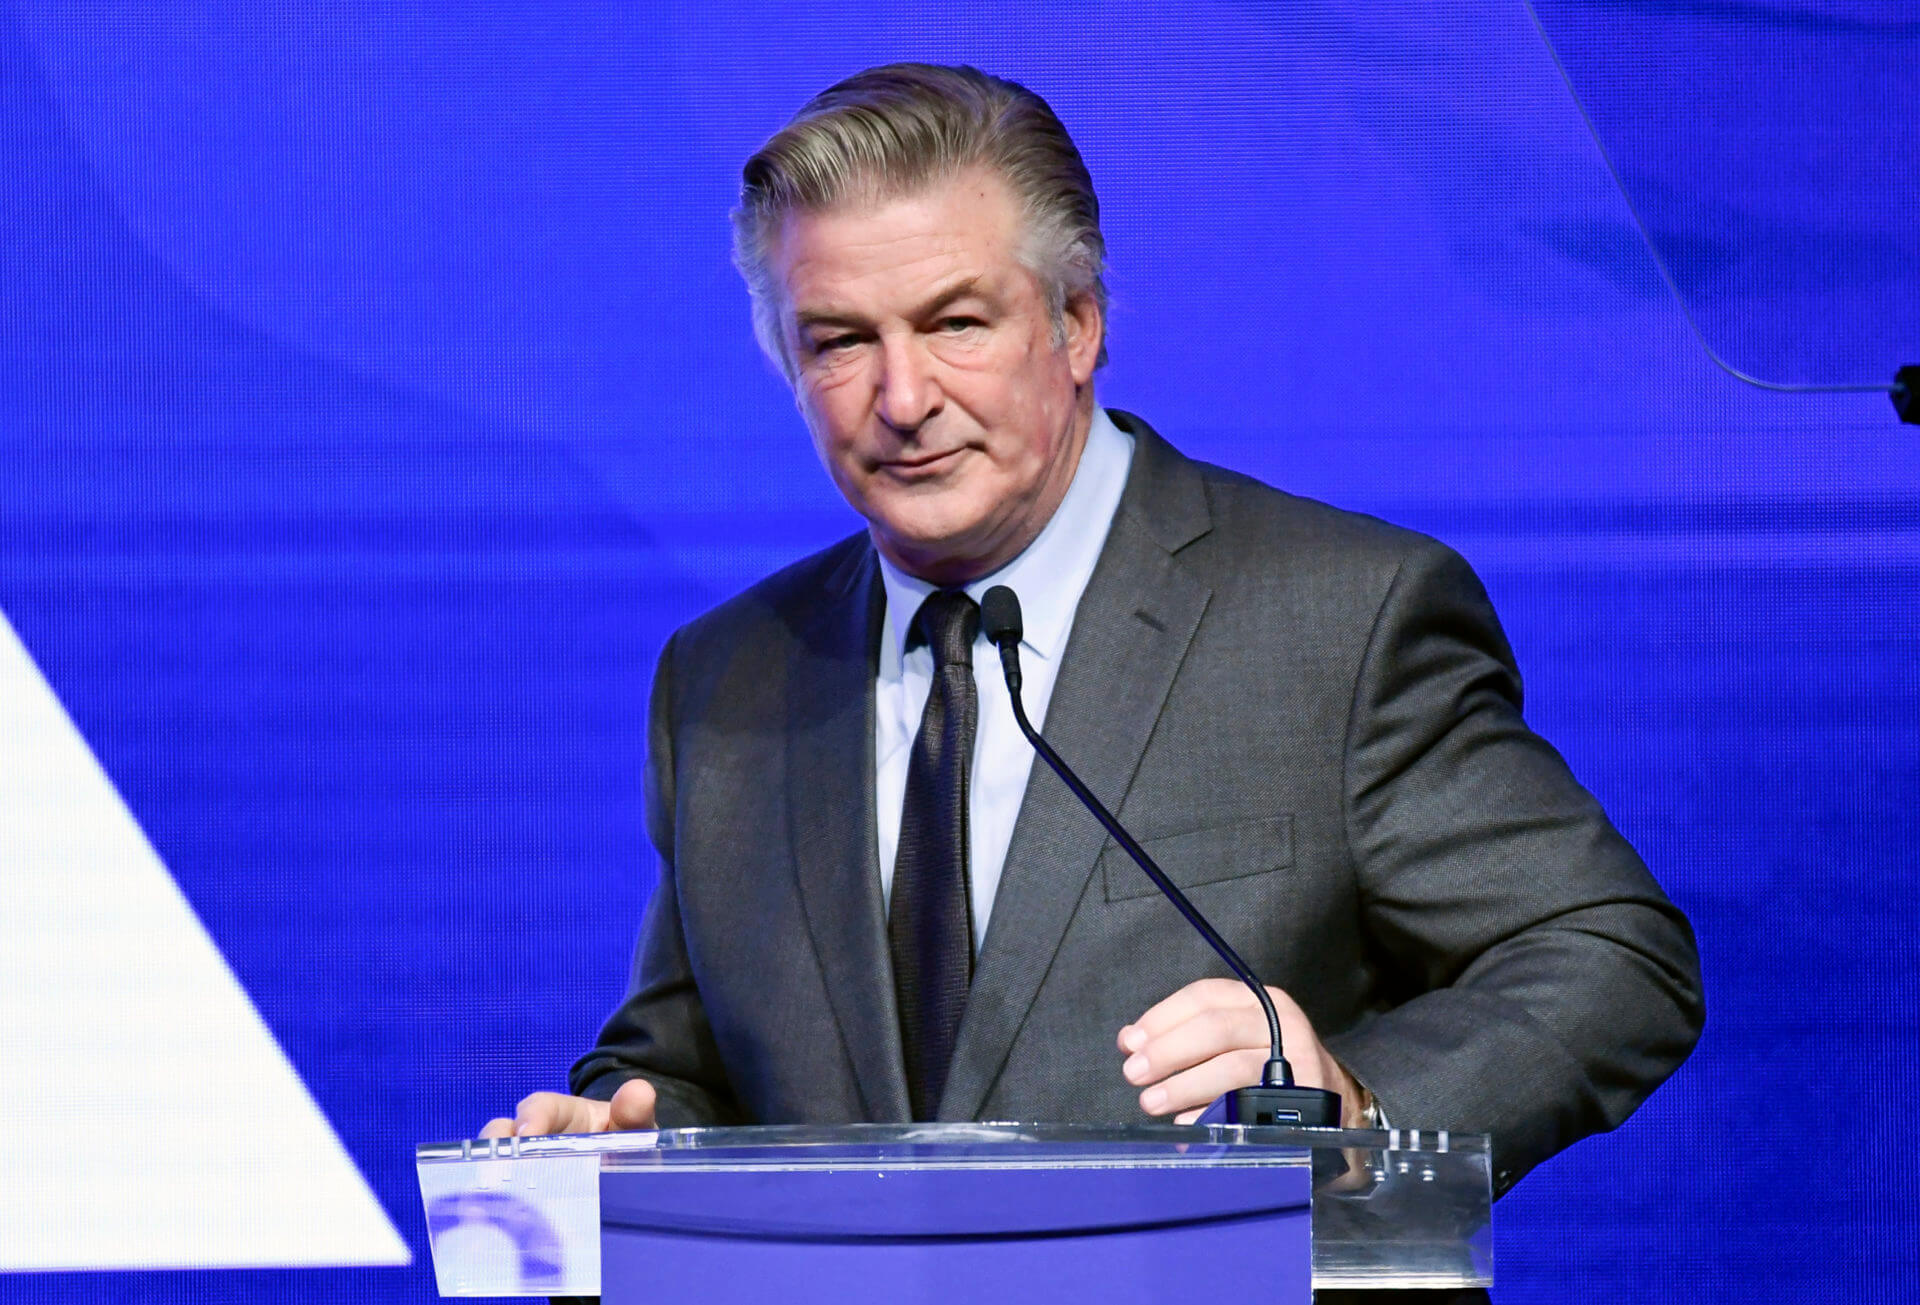 Big Story Roundup: Maya Millete, Brian Laundrie and Alec Baldwin – The Court TV Podcast